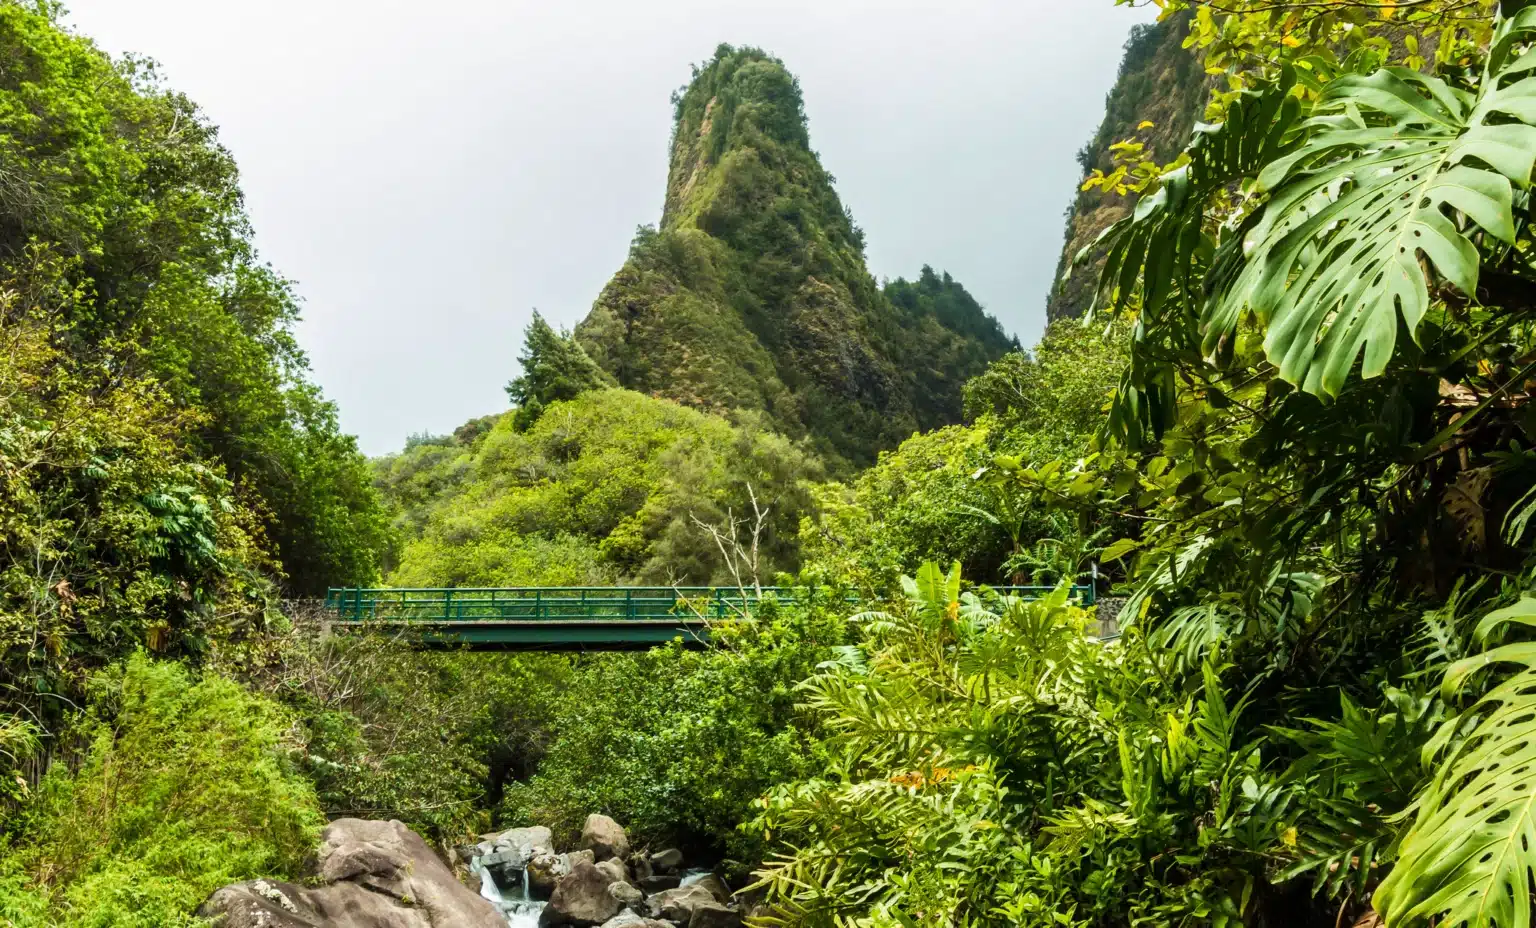 Iao Valley State Monument: Heritage Site Attraction in the town of Wailuku on Maui